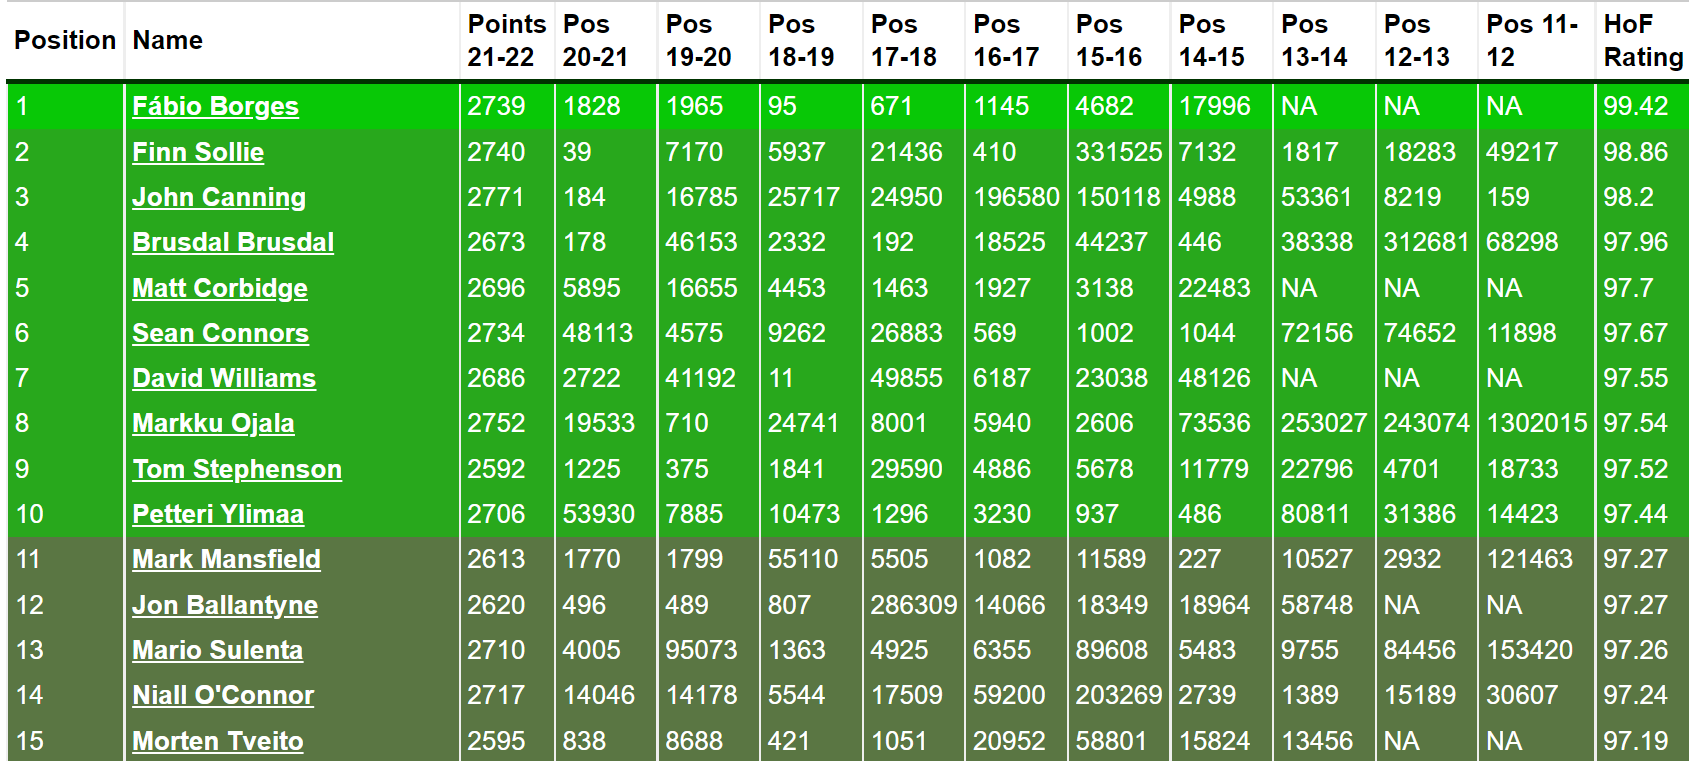 FPL Hall of Fame update: Where do you rank after the 2021/22